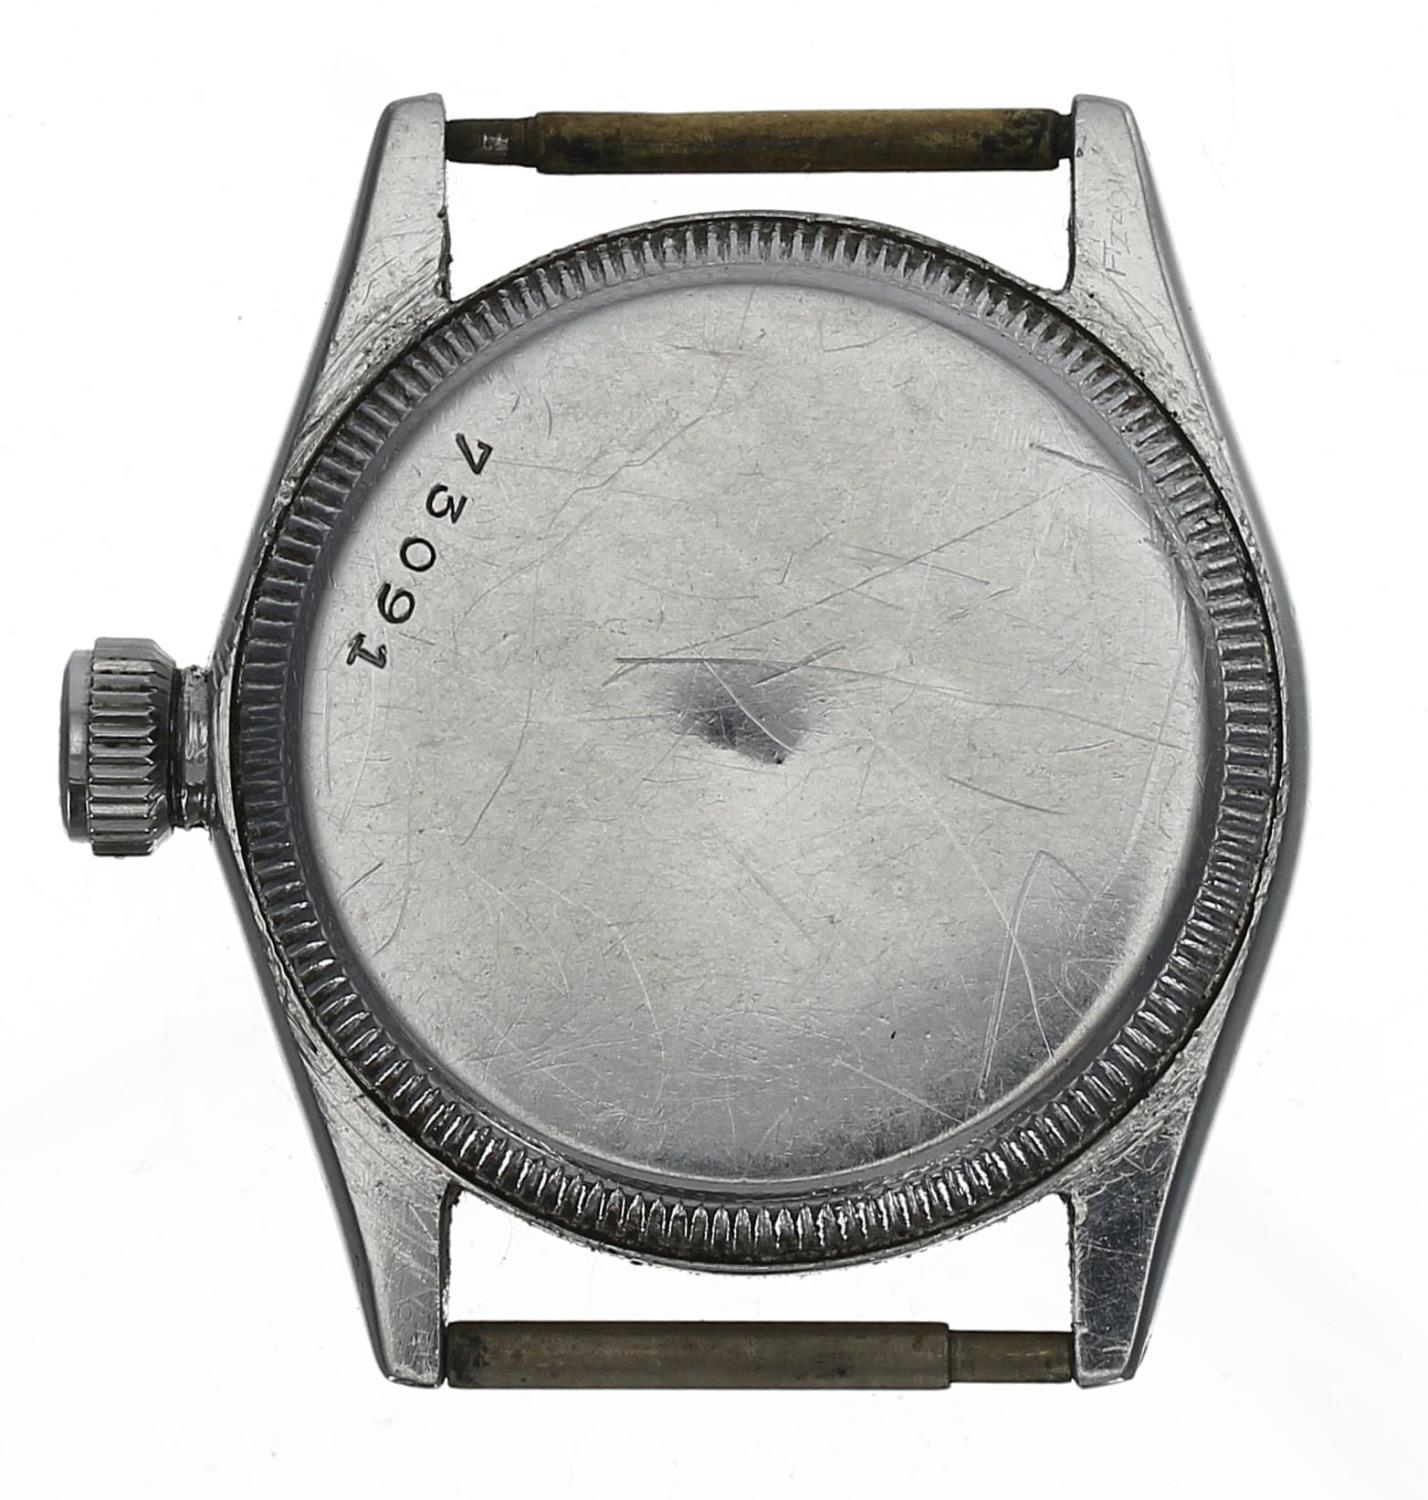 Rolex Oyster Royal mid-size stainless steel gentleman's wristwatch, serial no. 73xxx, circa 1954, - Image 2 of 3